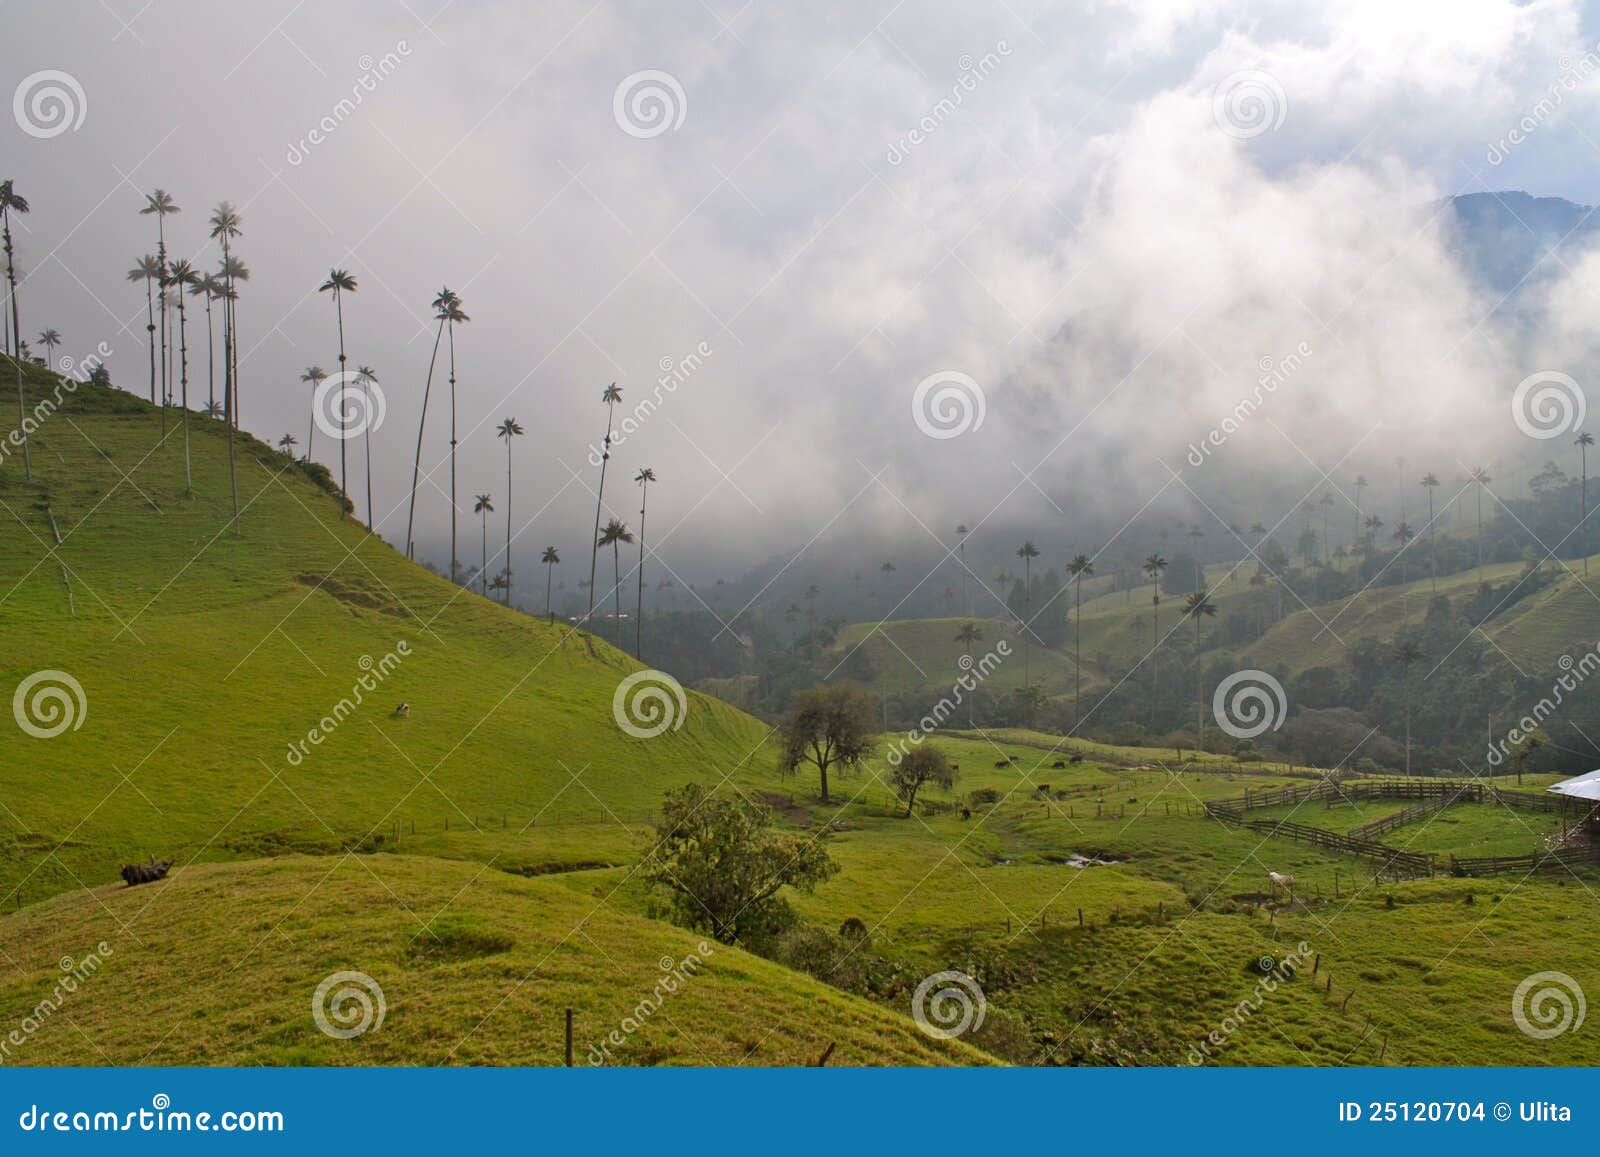 giant wax palms, cocora valley, colombia